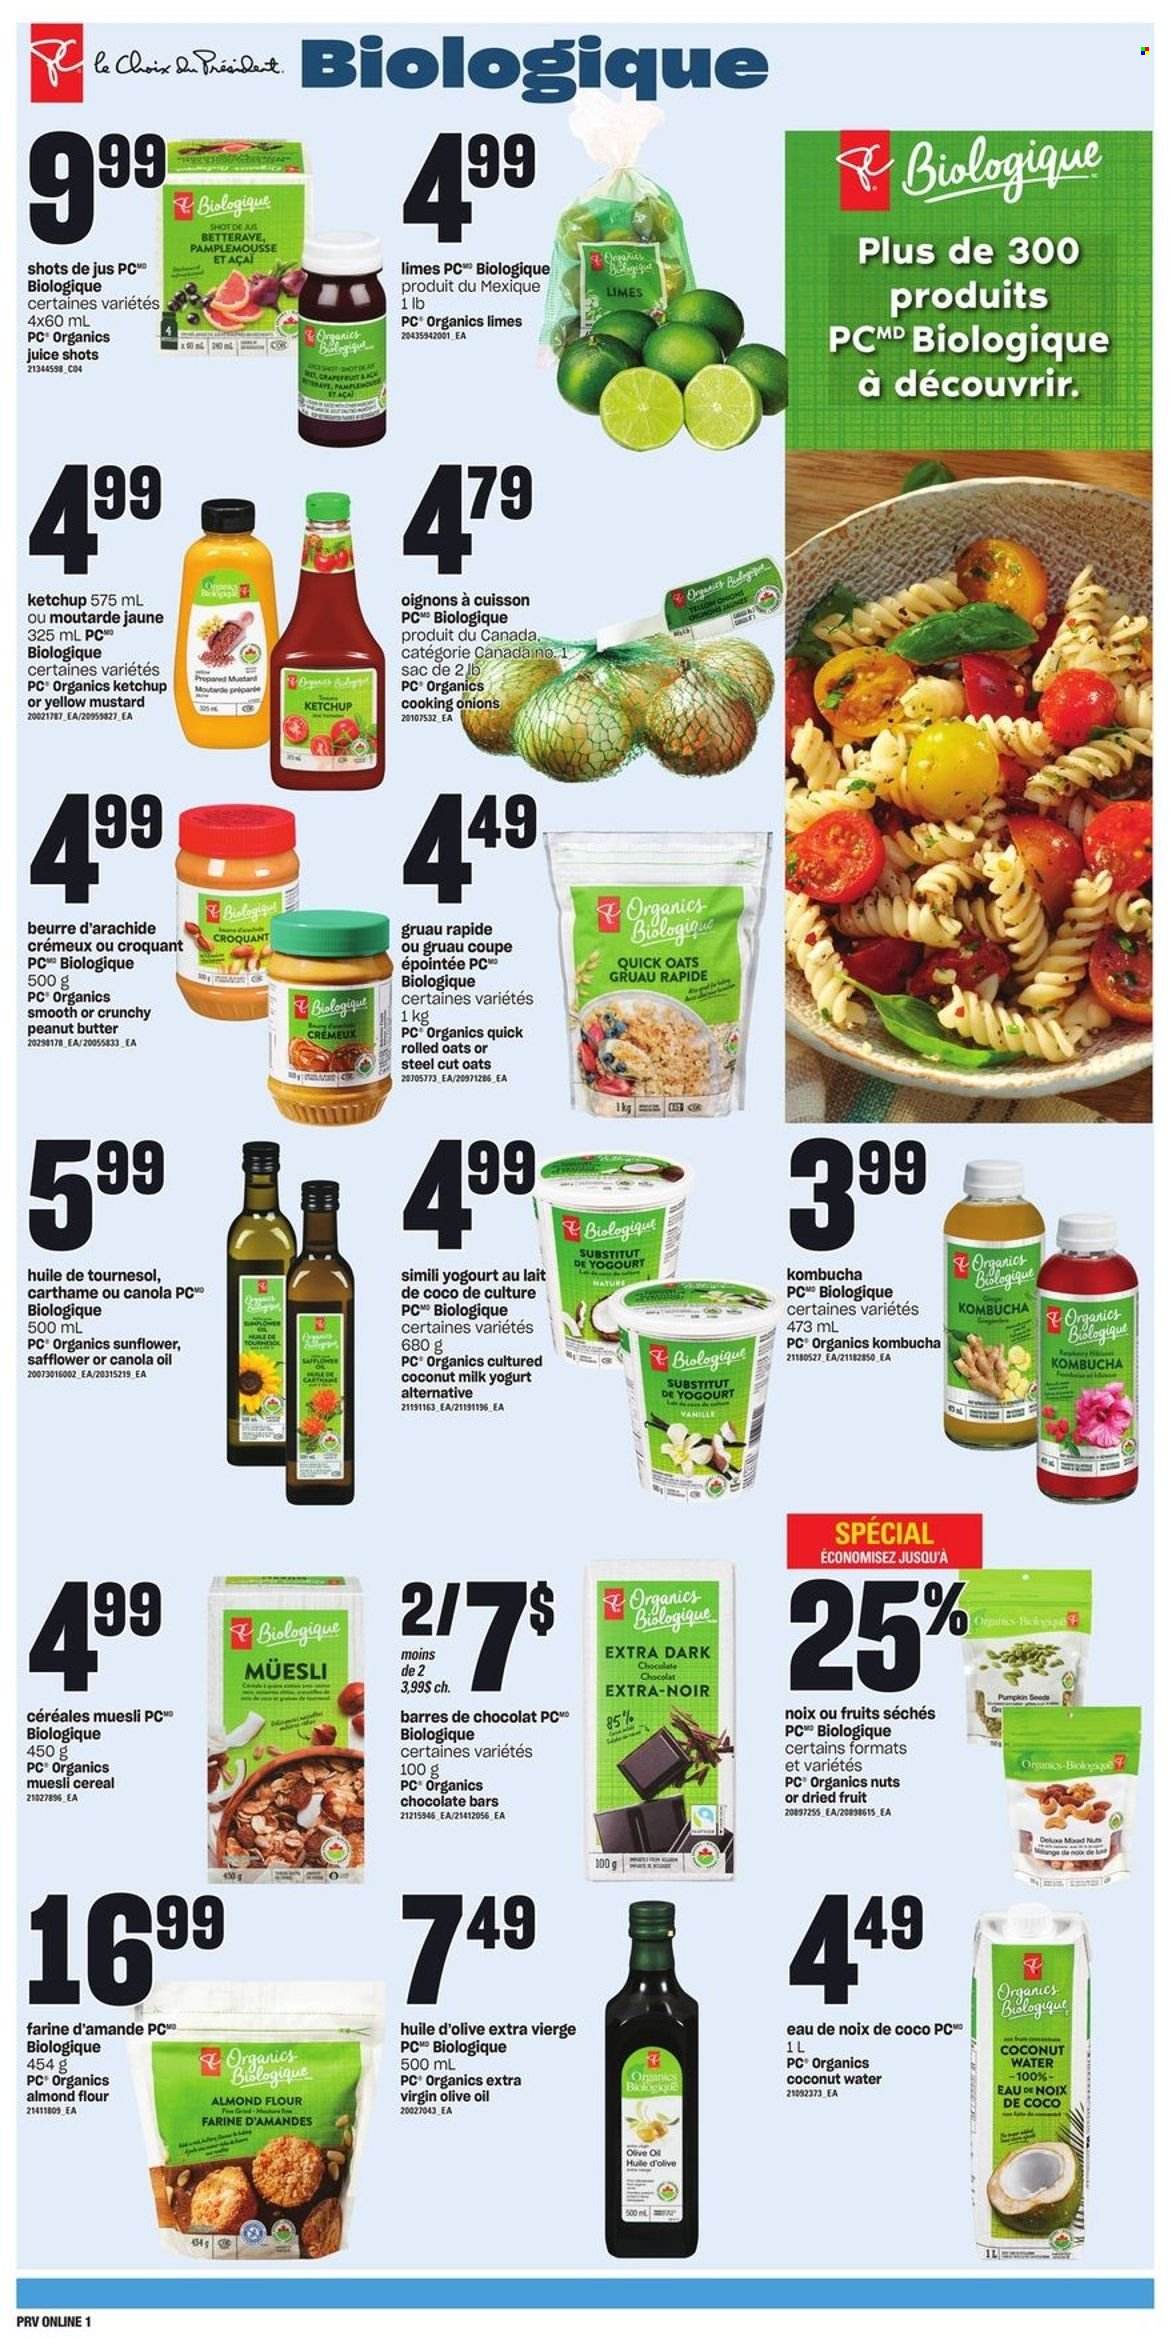 thumbnail - Provigo Flyer - March 16, 2023 - March 22, 2023 - Sales products - onion, grapefruits, limes, yoghurt, dark chocolate, chocolate bar, flour, oats, almond flour, coconut milk, cereals, rolled oats, muesli, Quick Oats, mustard, canola oil, extra virgin olive oil, olive oil, oil, peanut butter, dried fruit, pumpkin seeds, juice, coconut water, water, kombucha, ketchup. Page 5.